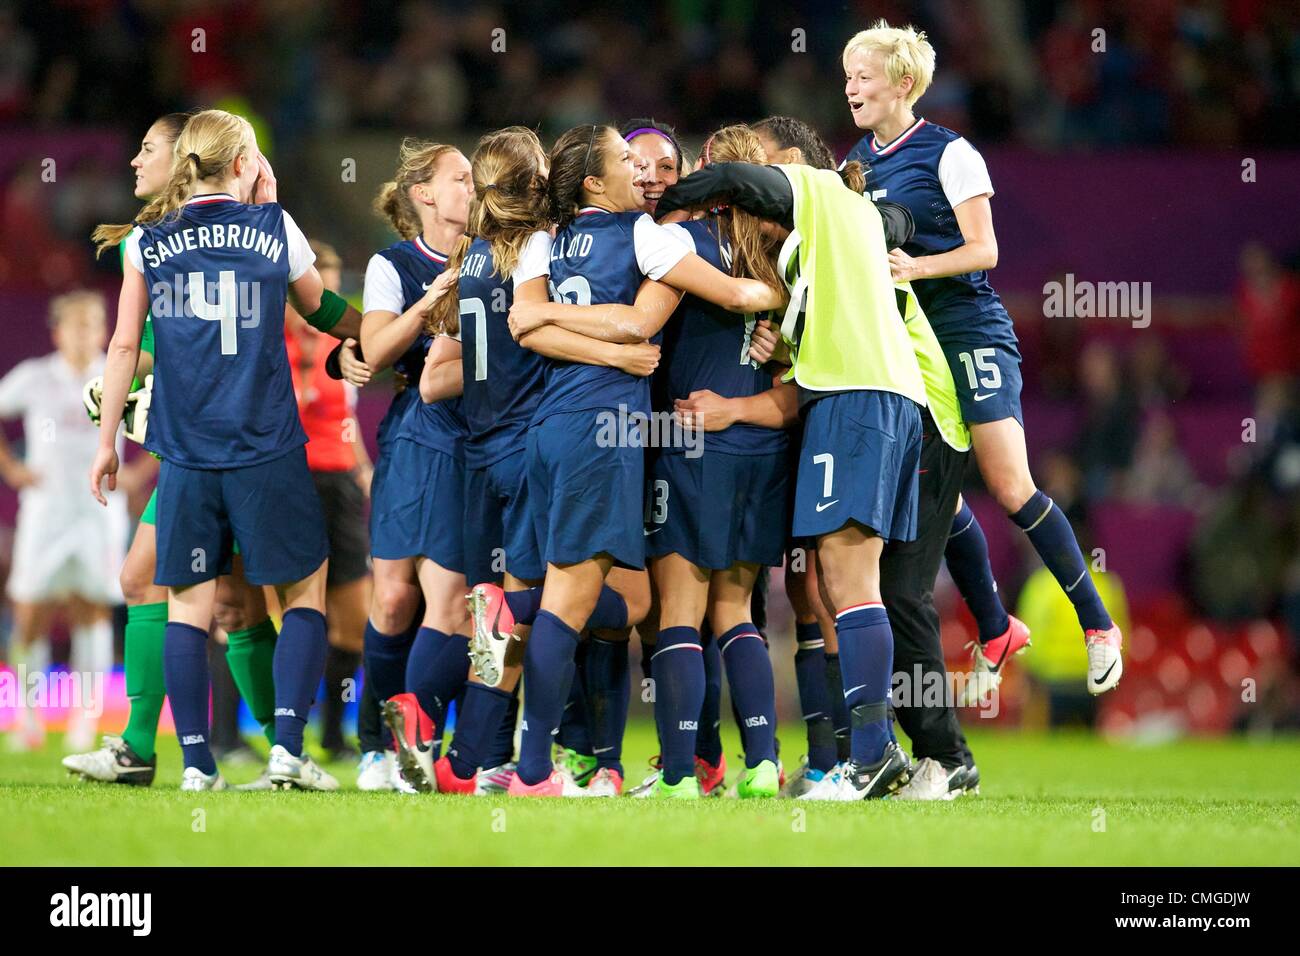 06.08.2012 Manchester, England. Team USA celebrate a last minute victory  in the women's semi final match between Team USA and Canada at Old Trafford. USA scored a late injury time winner to go through to the gold medal match by a score of 4-3. Stock Photo